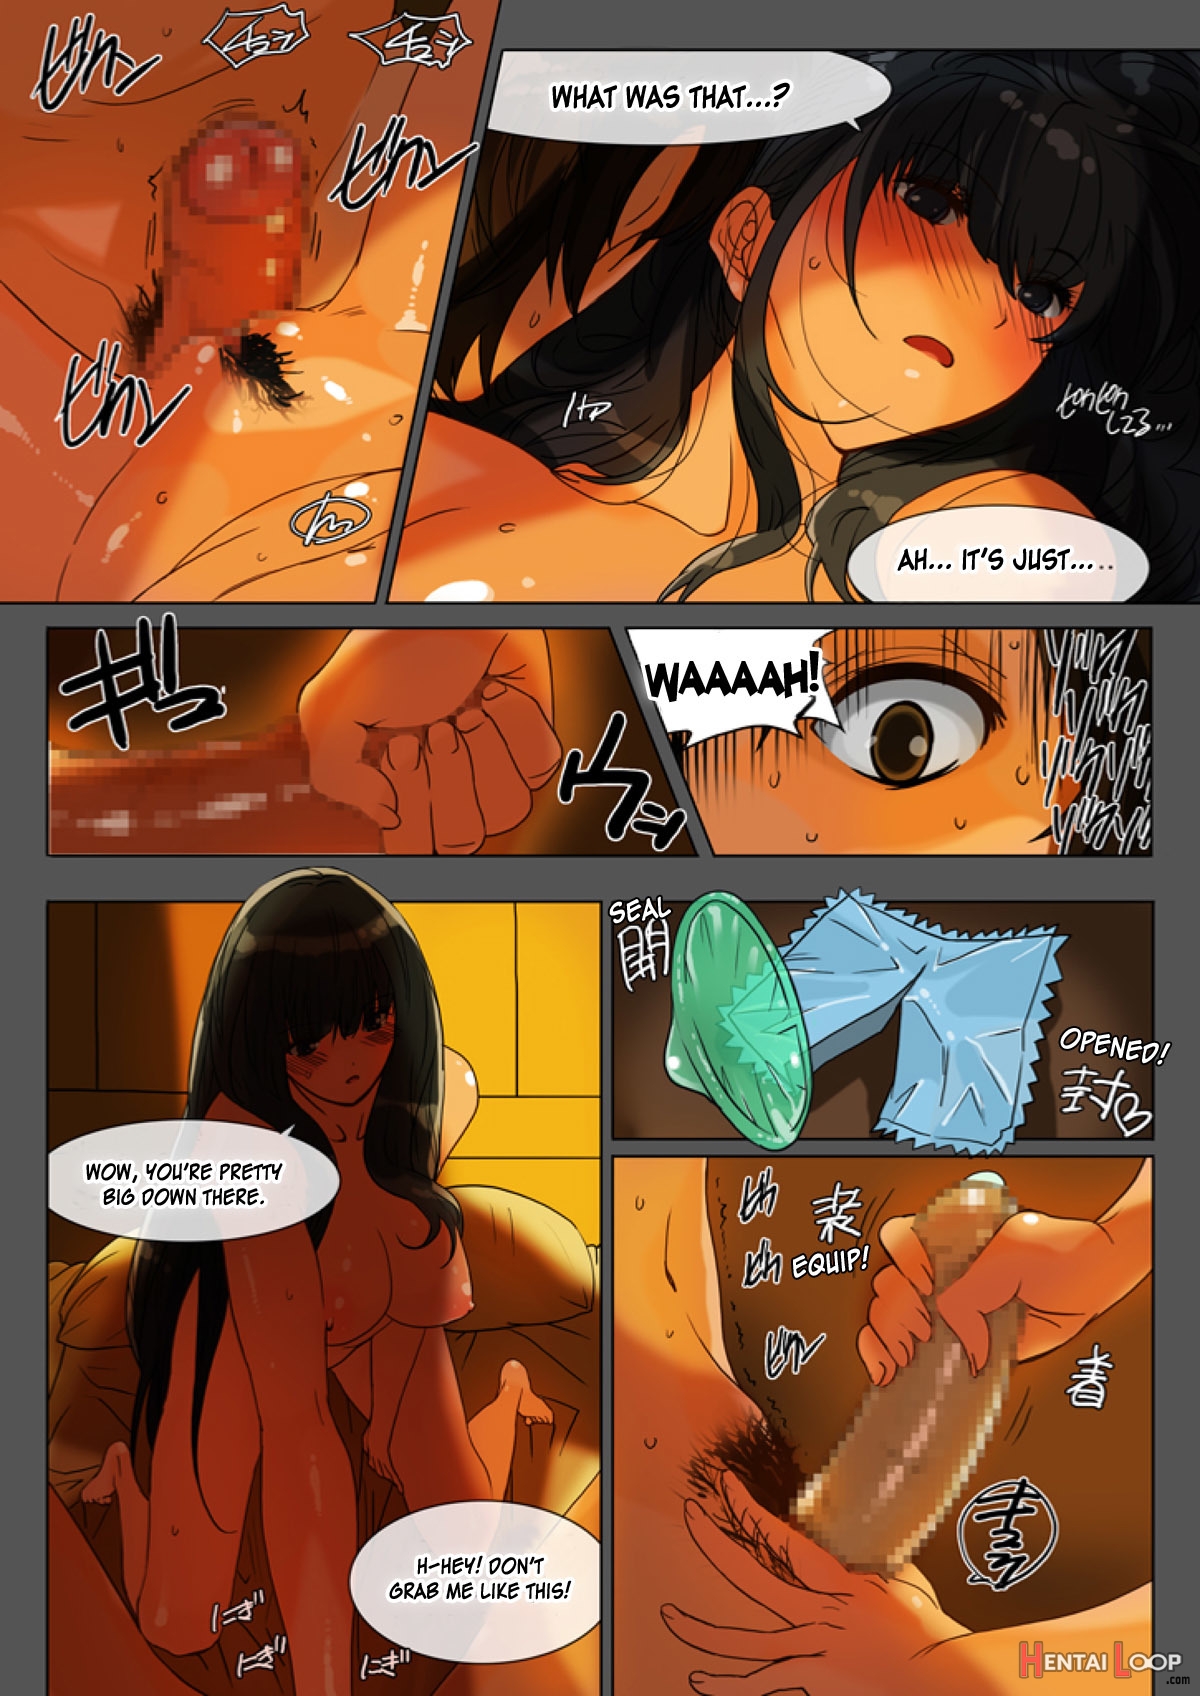 No Panty Girl Episode 1 page 16